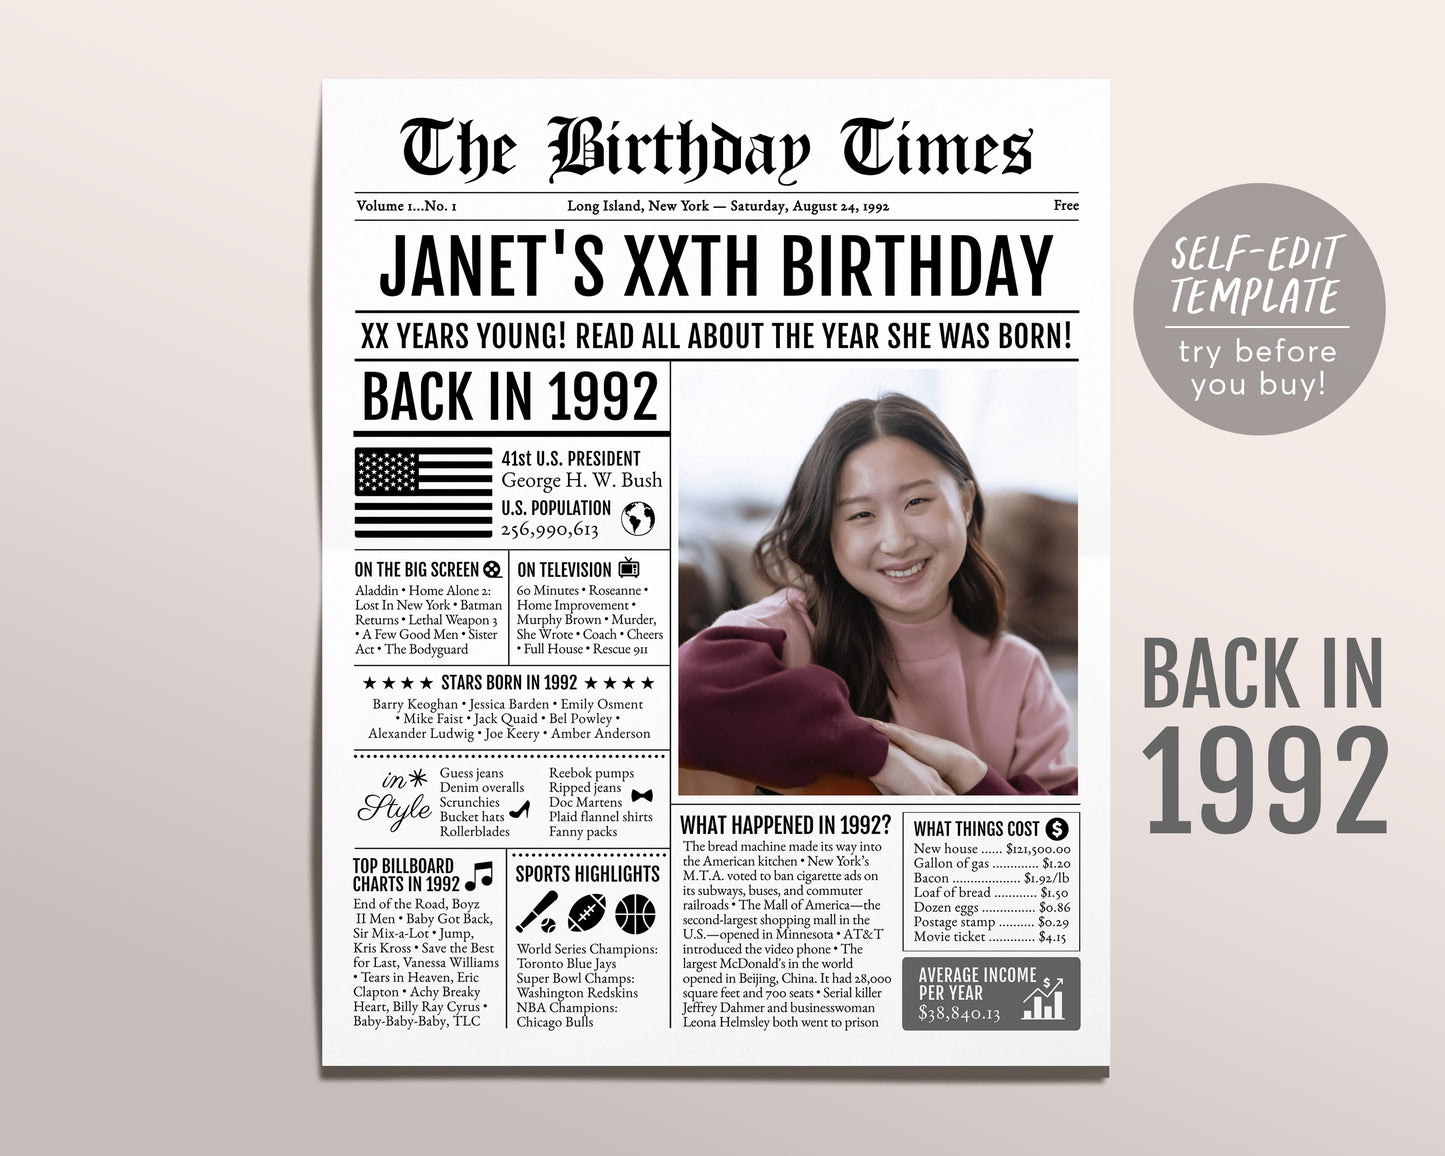 Back in 1992 Birthday Newspaper Editable Template, 31 32 33 Years Ago, 31st 32nd 33rd Birthday Sign Decorations Decor for Men or Women